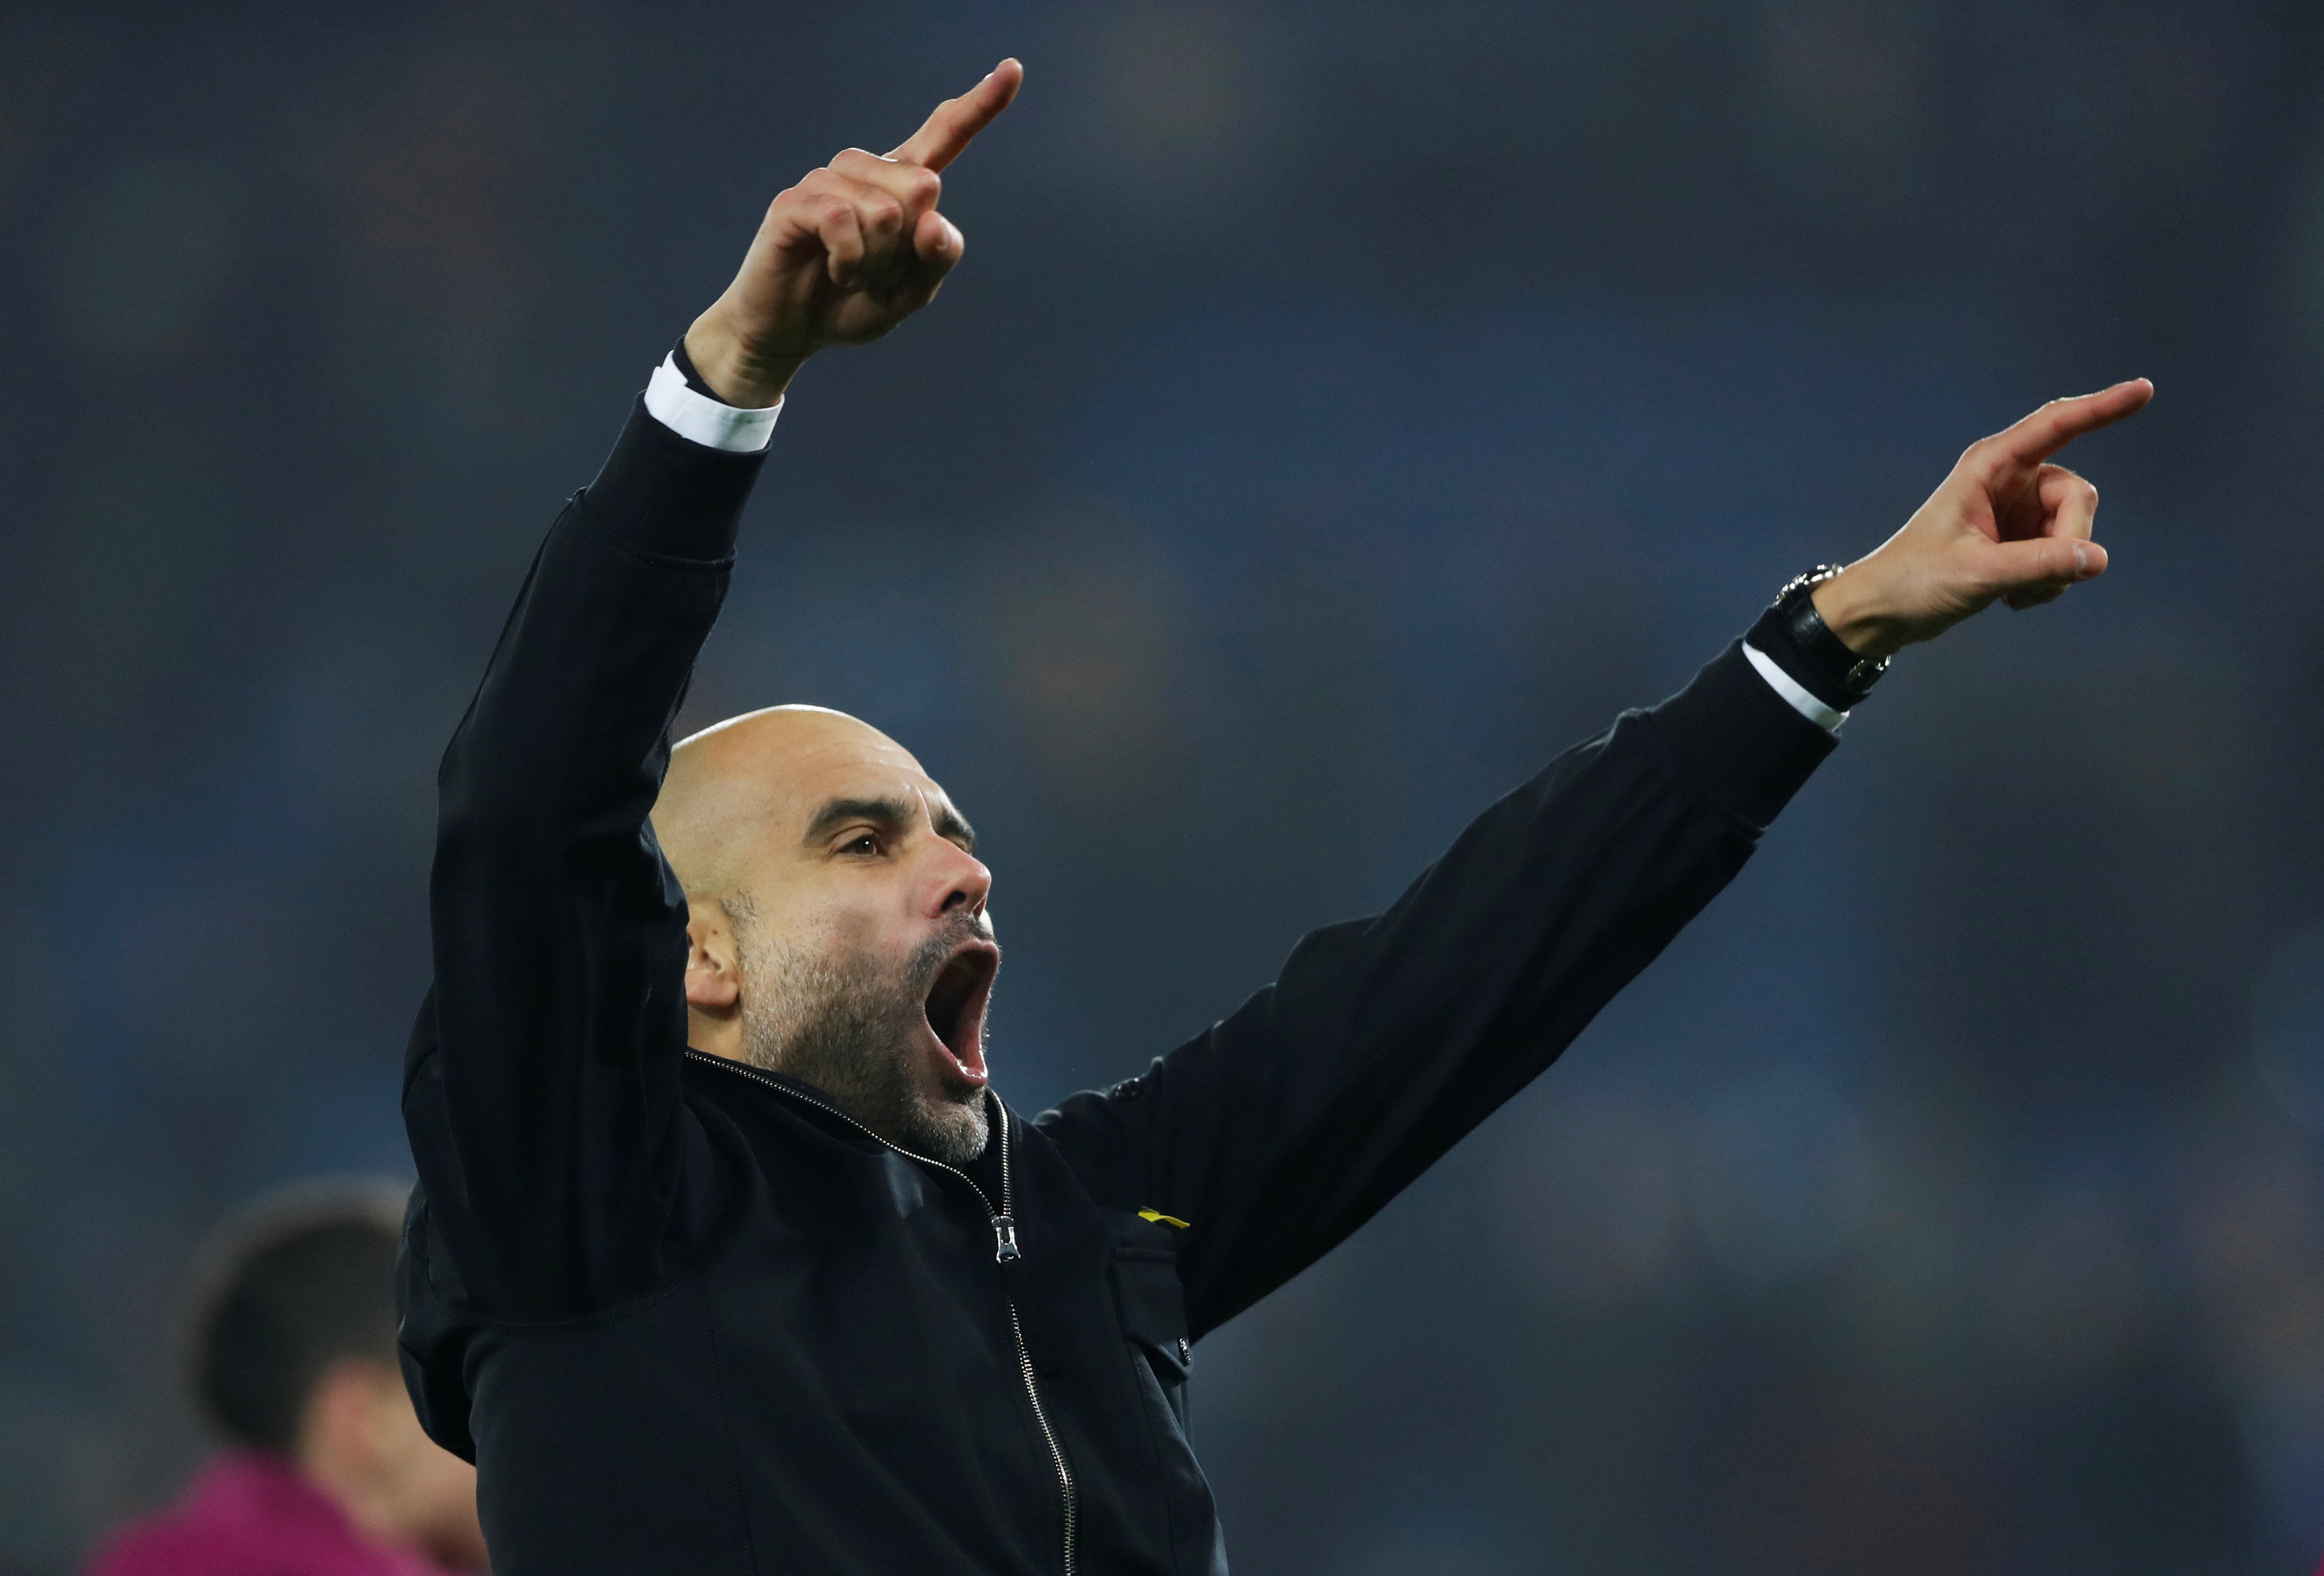 Football: Guardiola asks referees to protect players from bad tackles